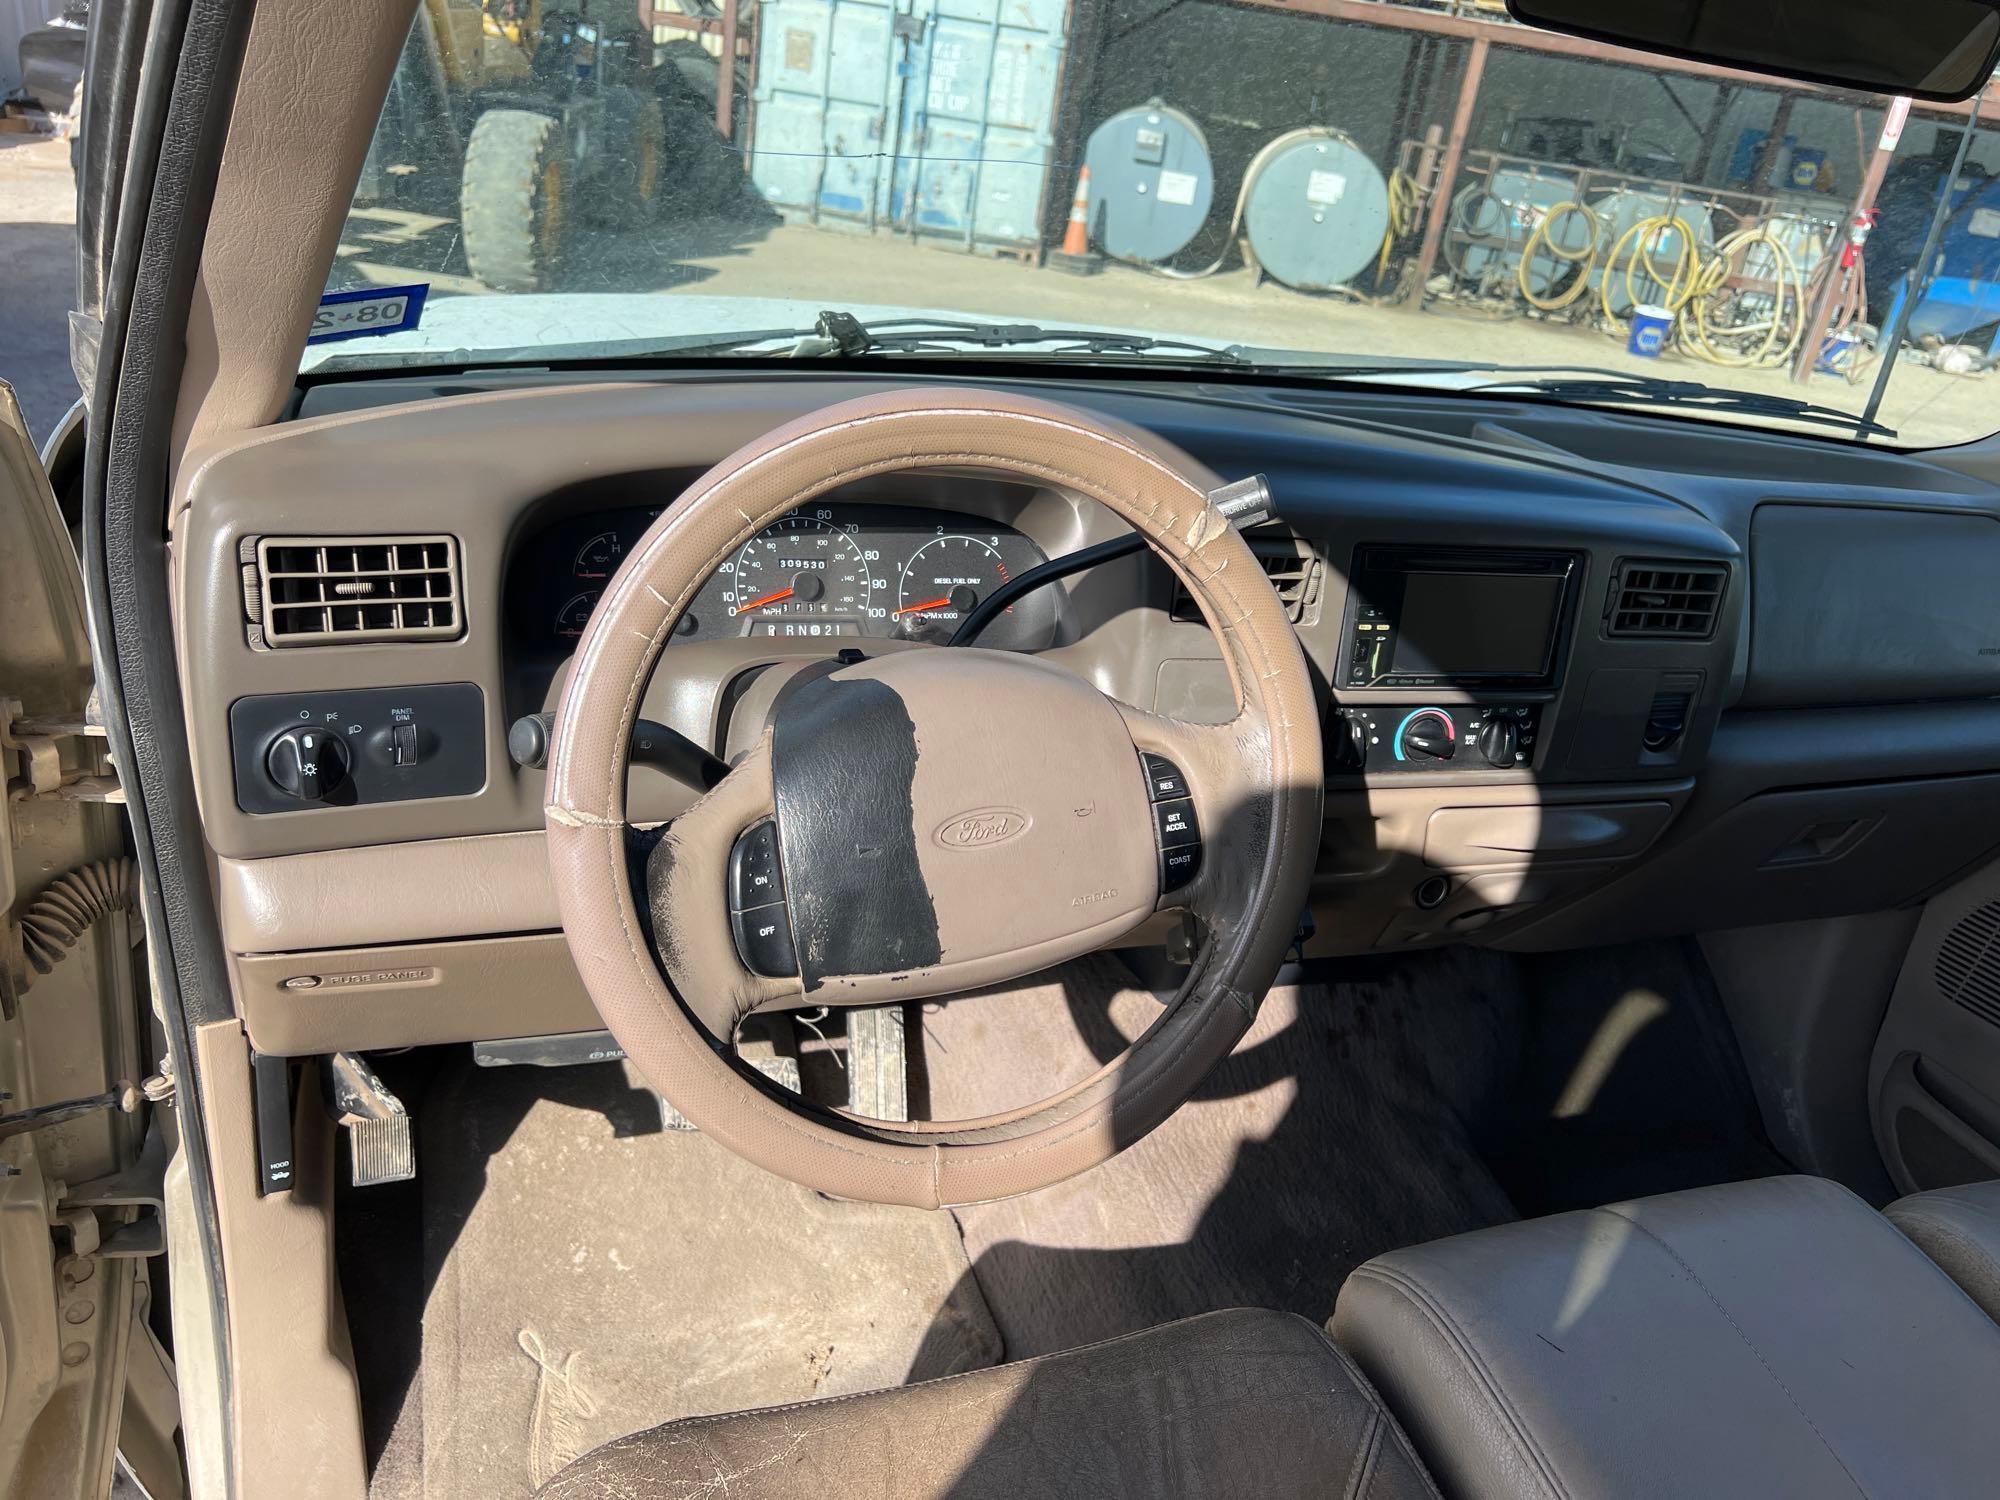 2000 FORD F350 LARIAT PICKUP TRUCK VN:1FTWW32F9YED65349 powered by 7.3L diesel engine, equipped with